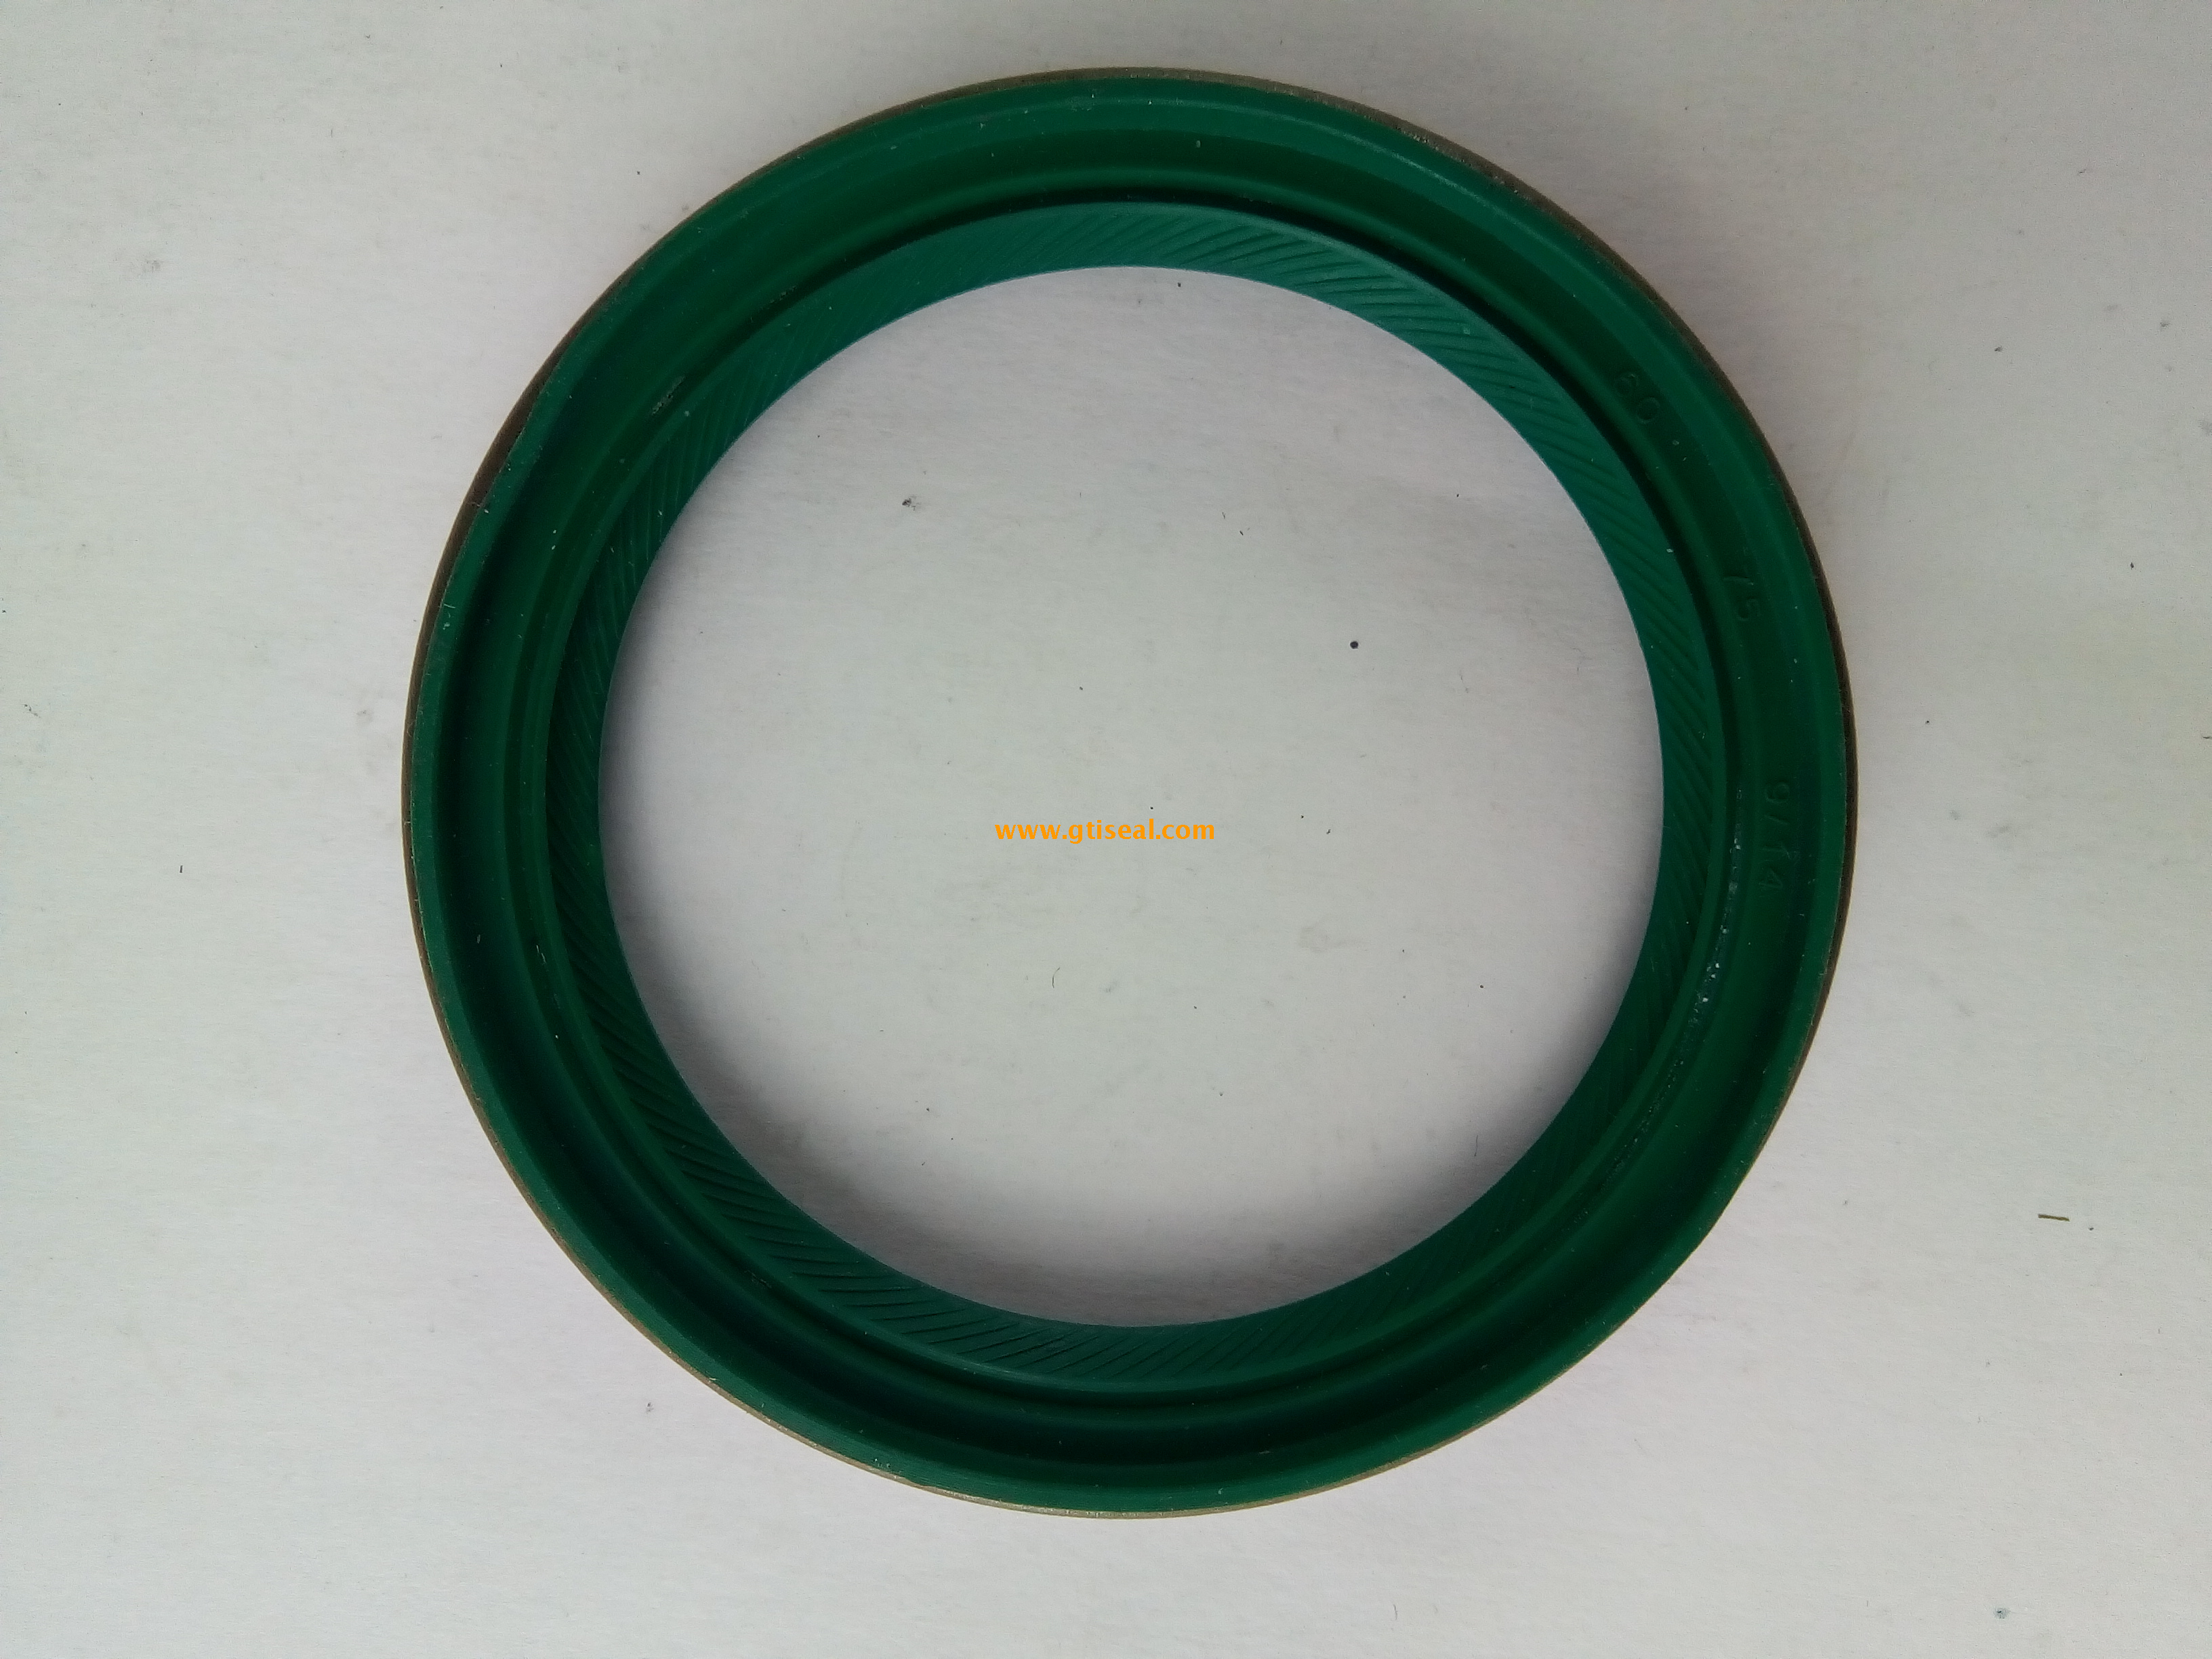 Rear Wheel Rubber Seals for National Oil Seal Size Chart